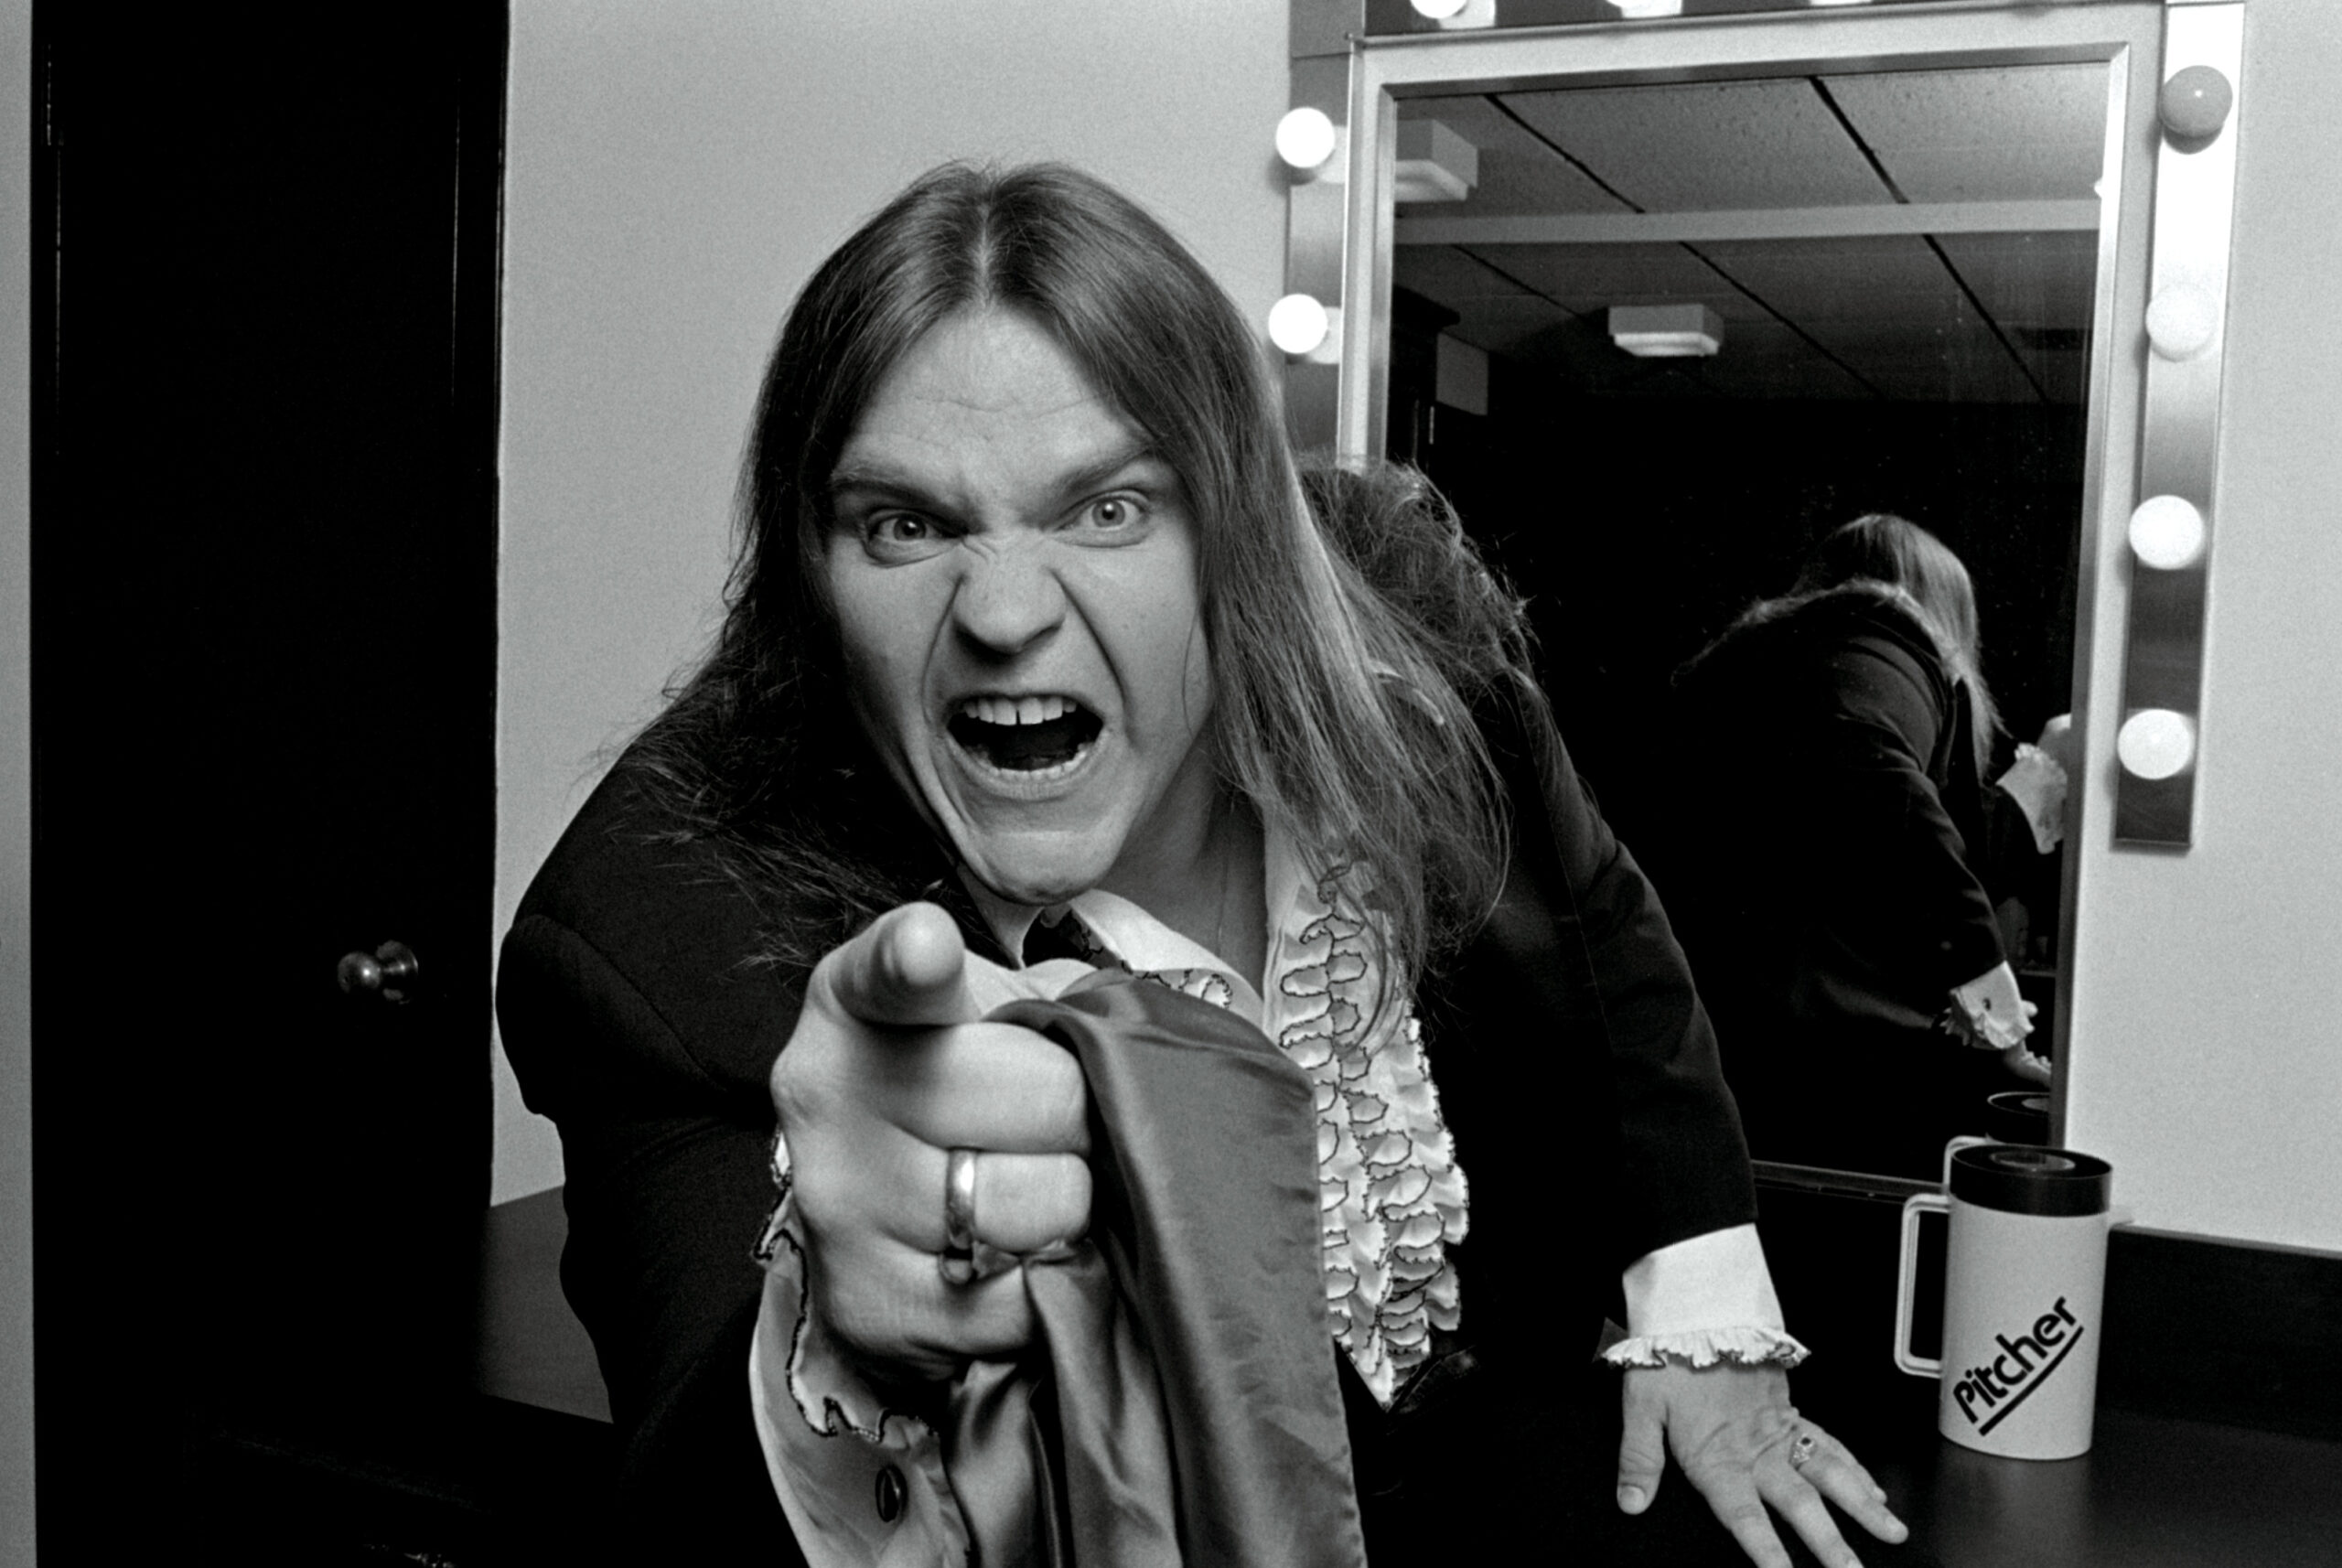 Meat Loaf, 'Bat Out of Hell' Singer, Dies at 74